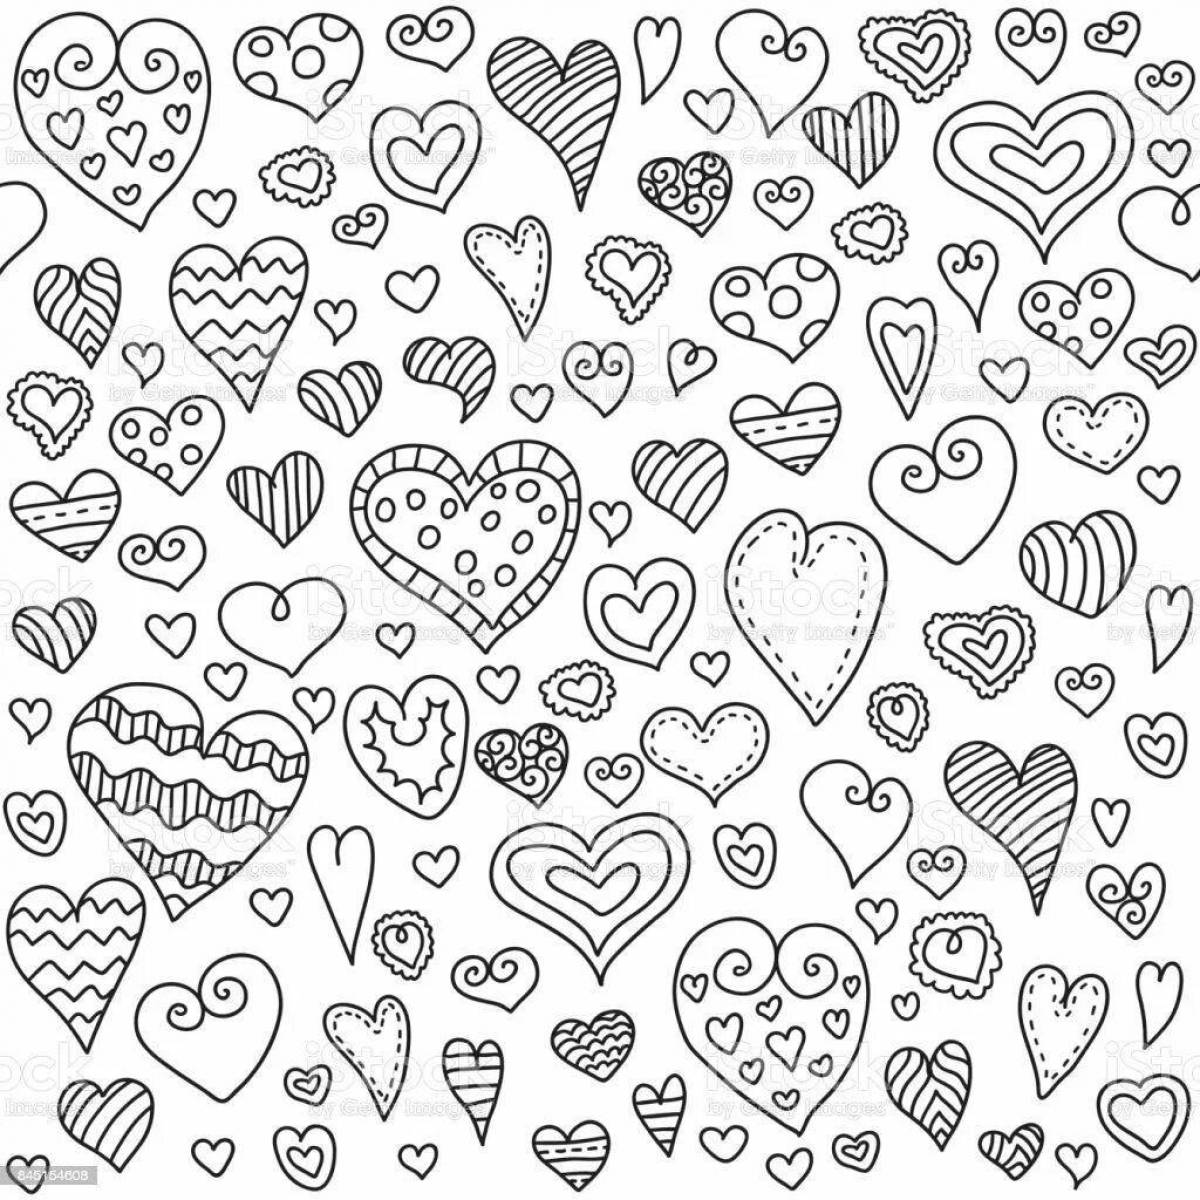 Exquisite heart coloring page